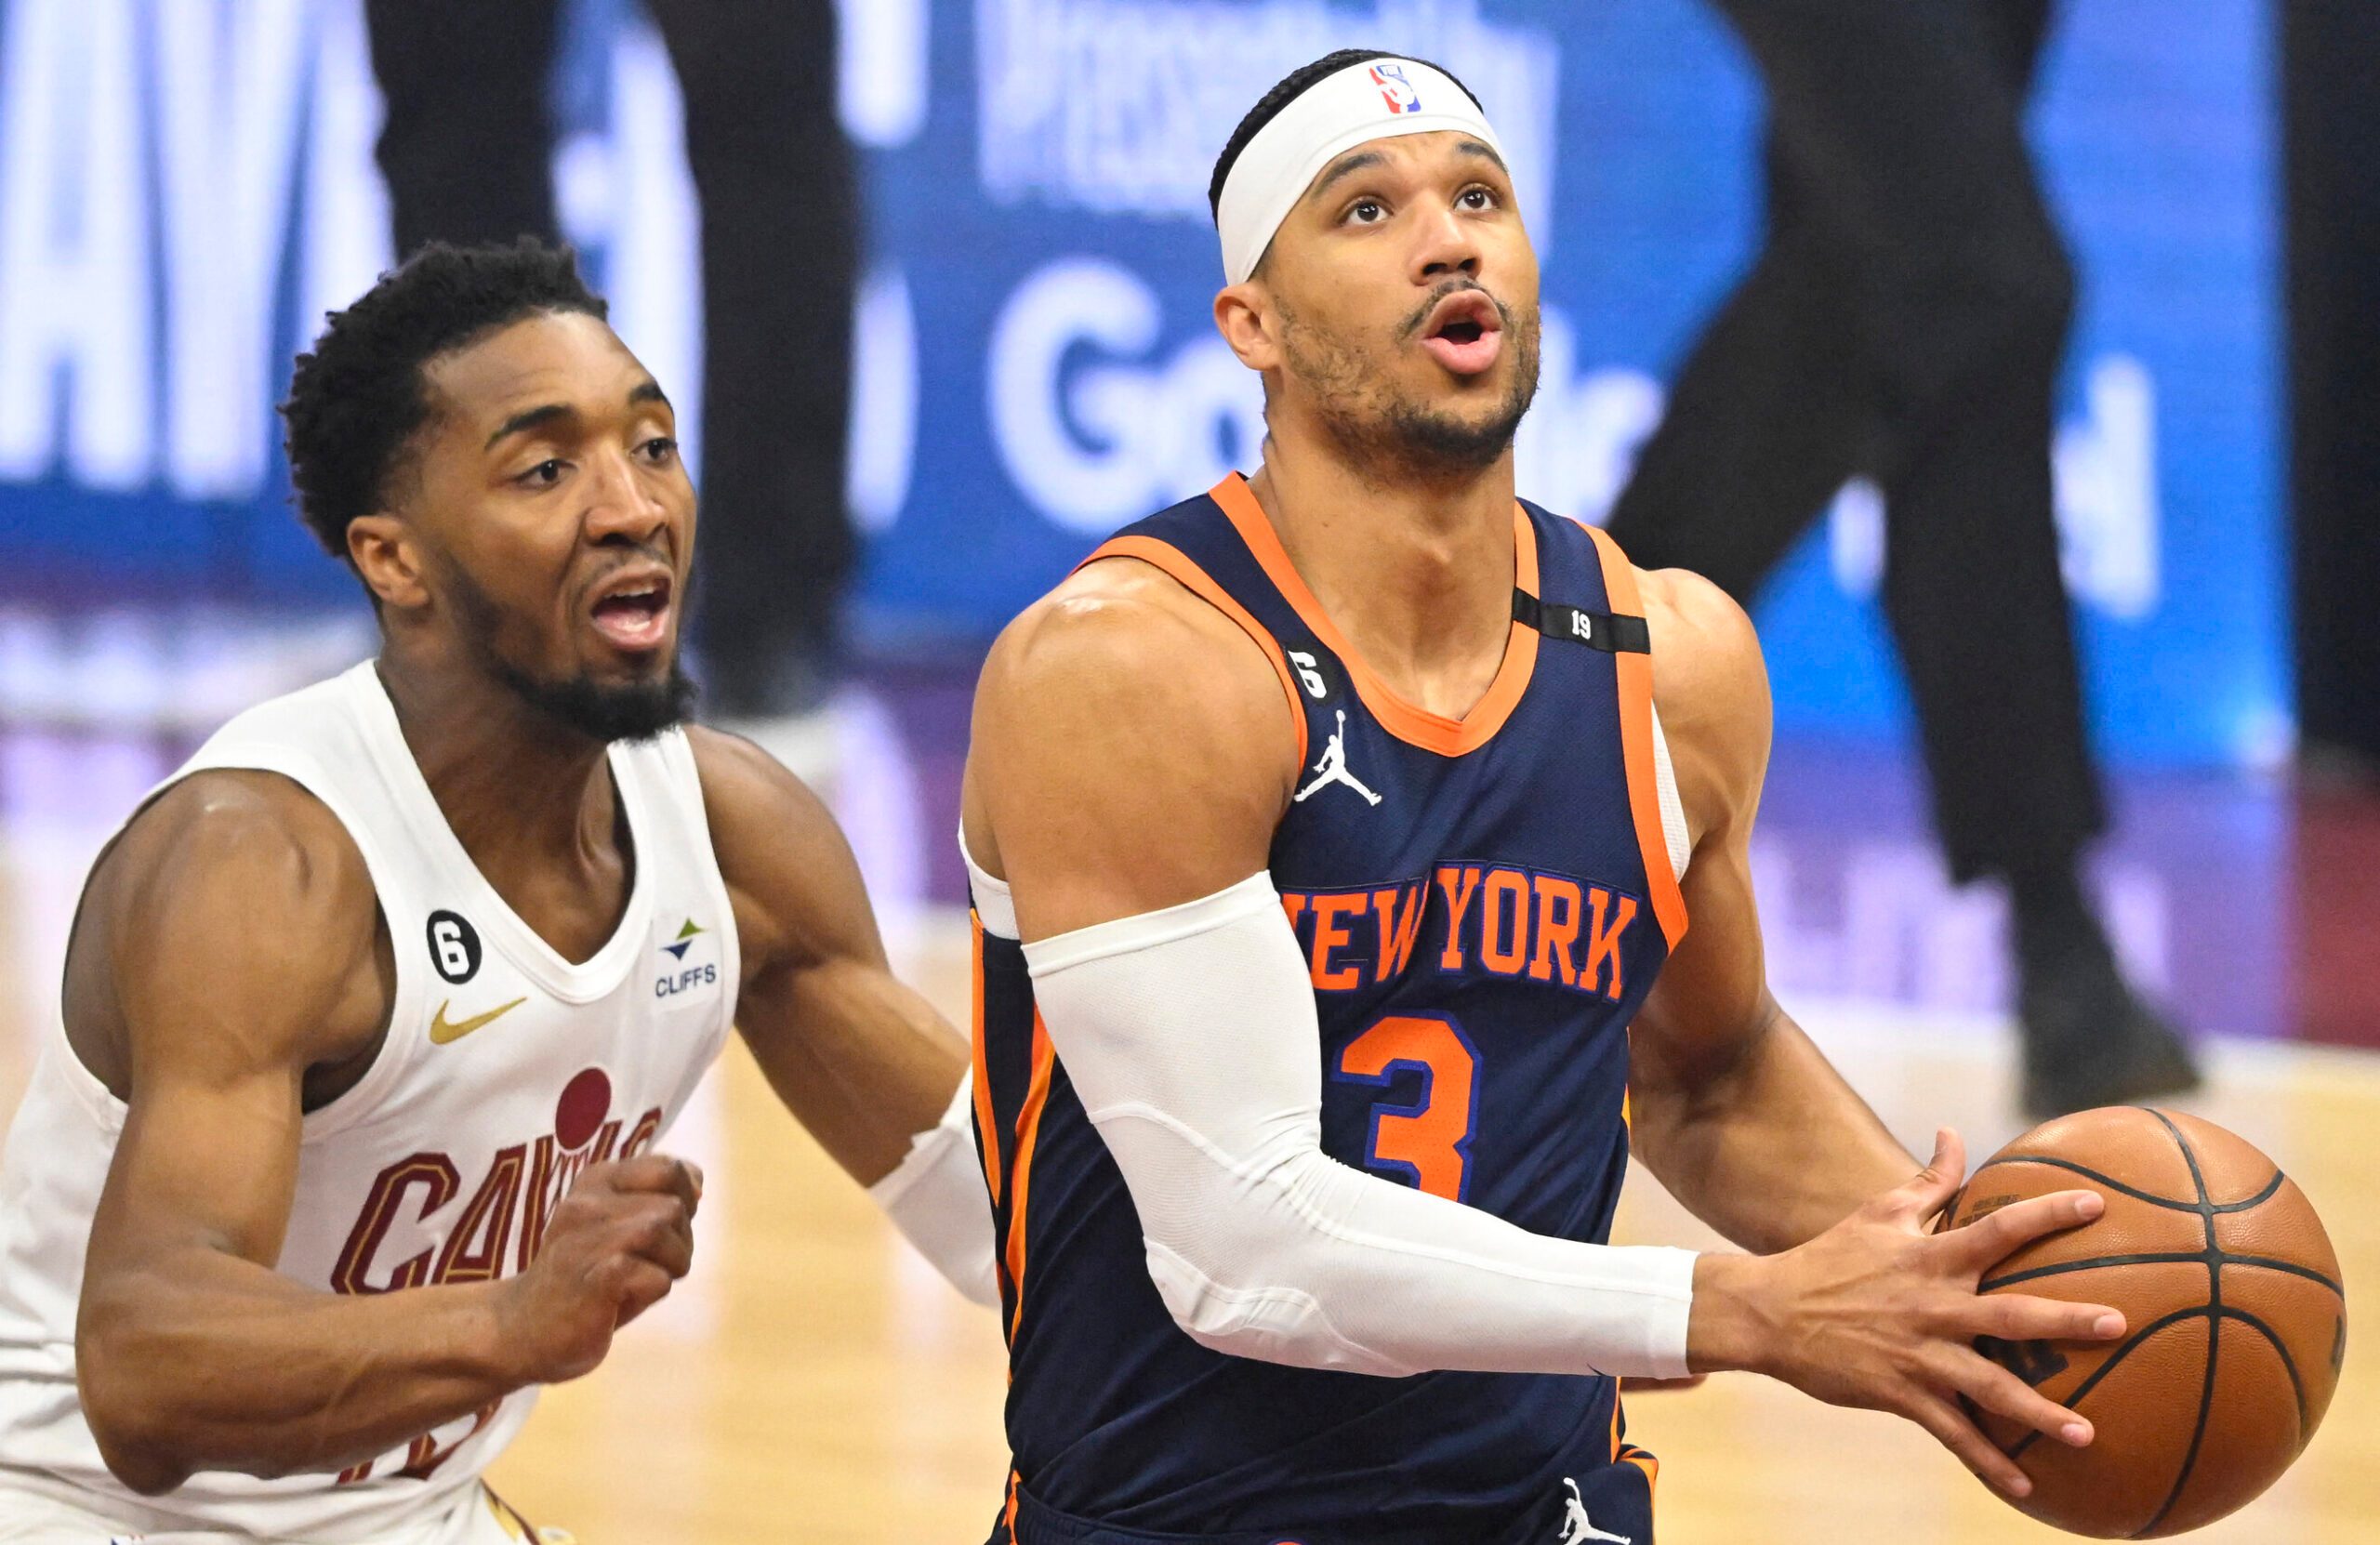 Knicks cruise past Cavs, seal series in Game 5